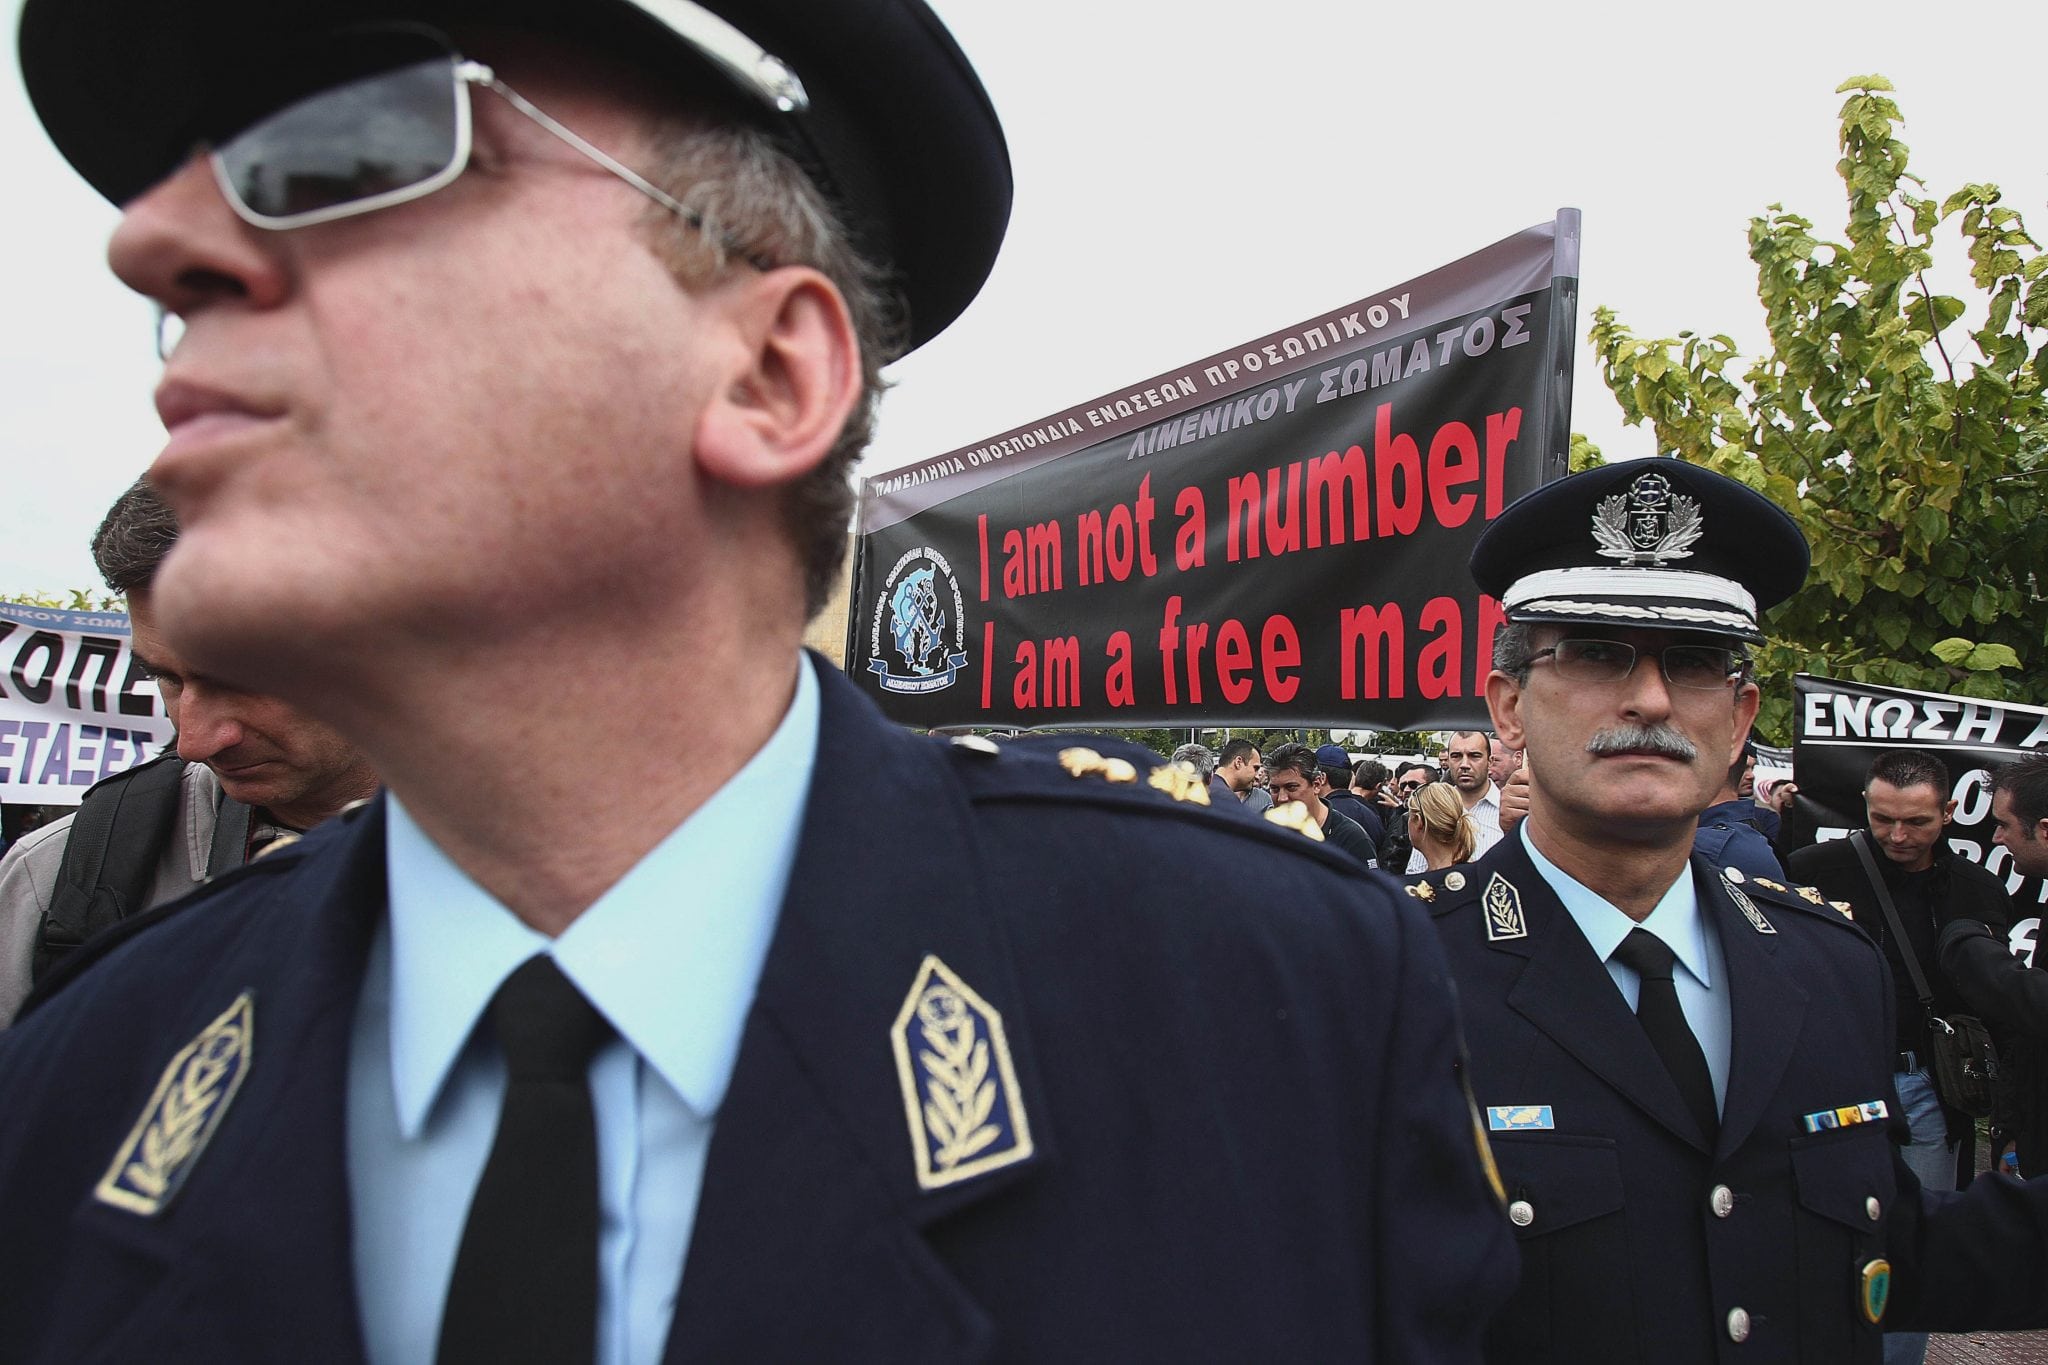 Police officers stand in front of a banner during a protest in central Athens on Thursday, Nov. 1, 2012. 